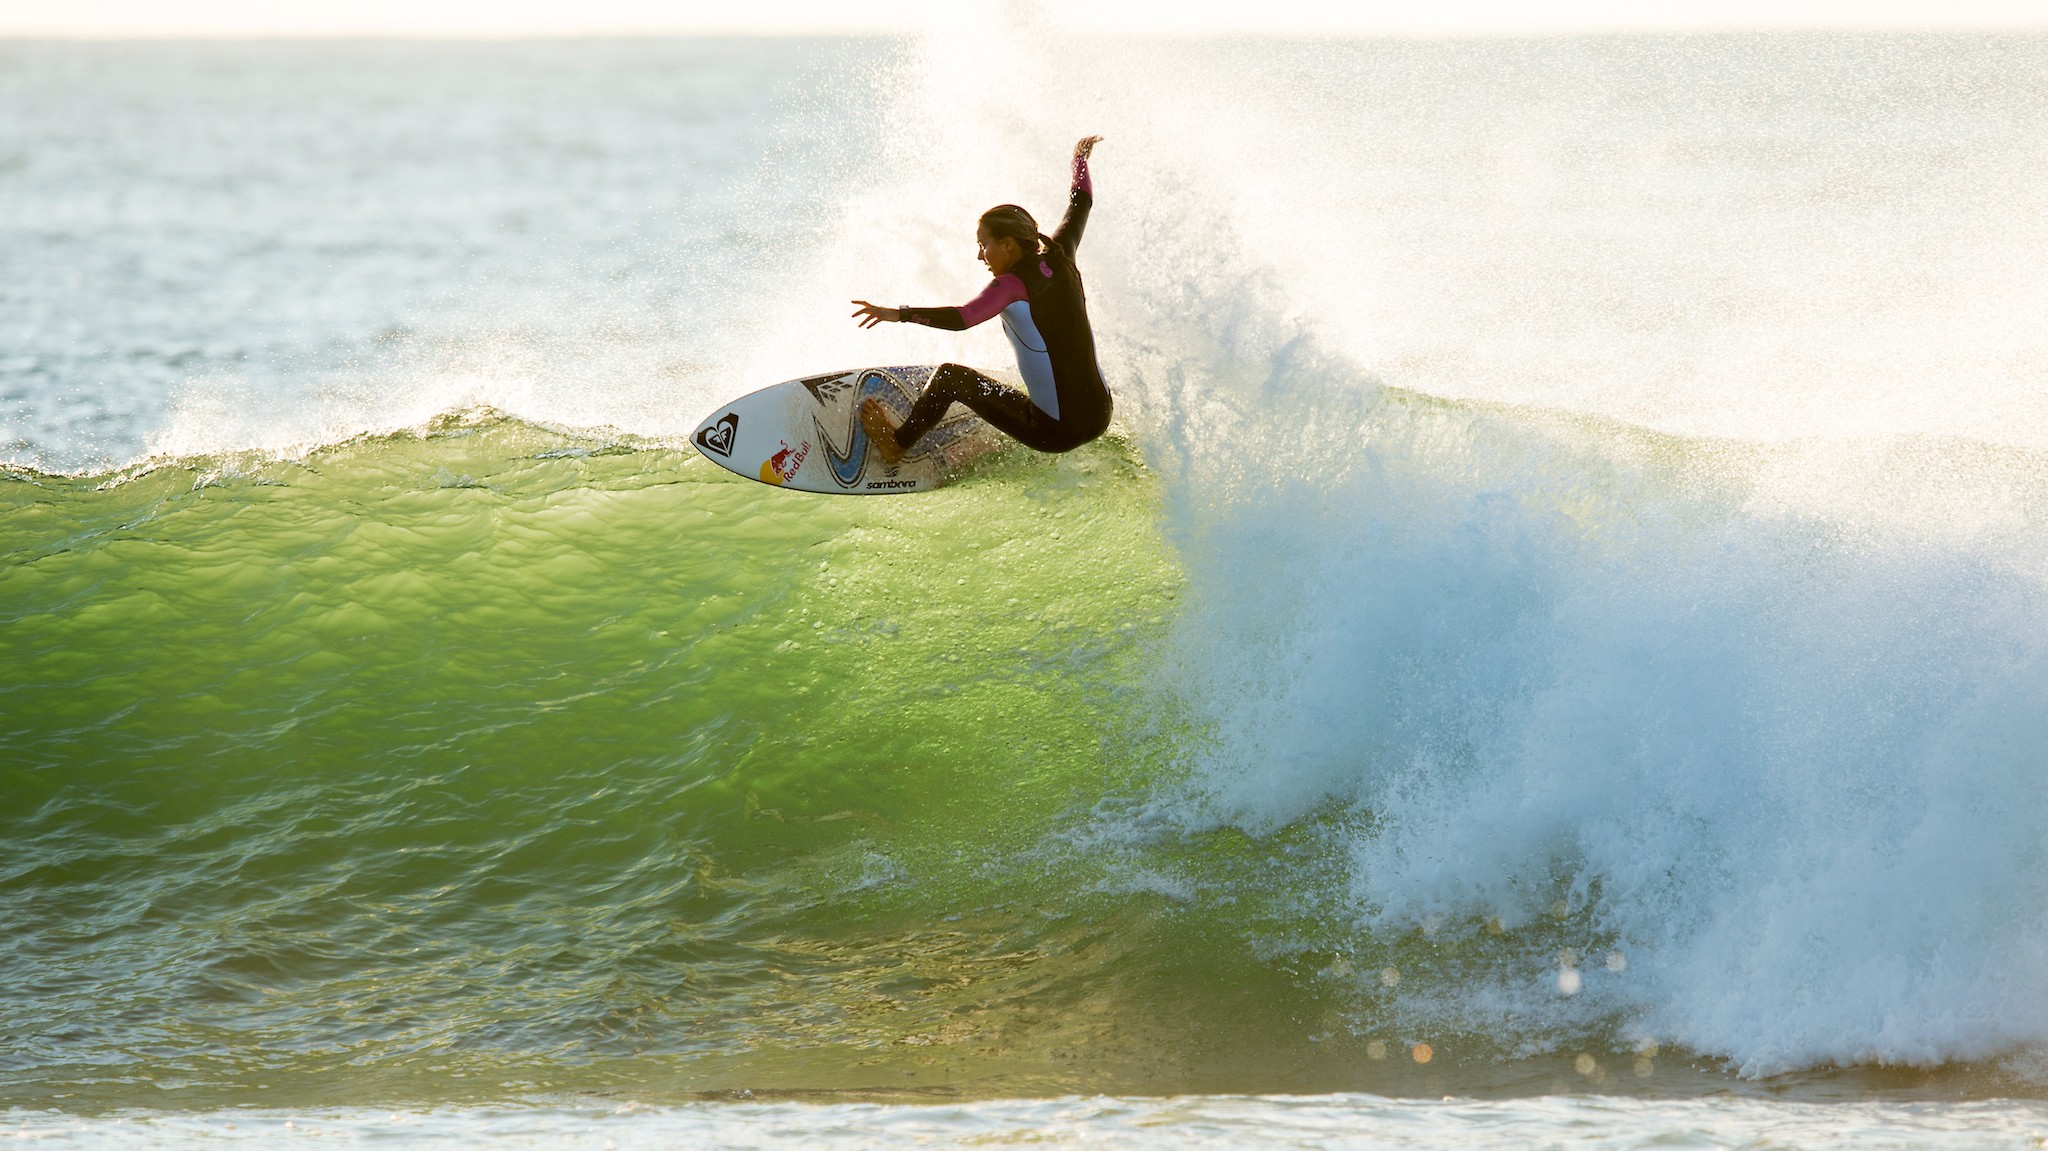 31. Sally Fitzgibbons